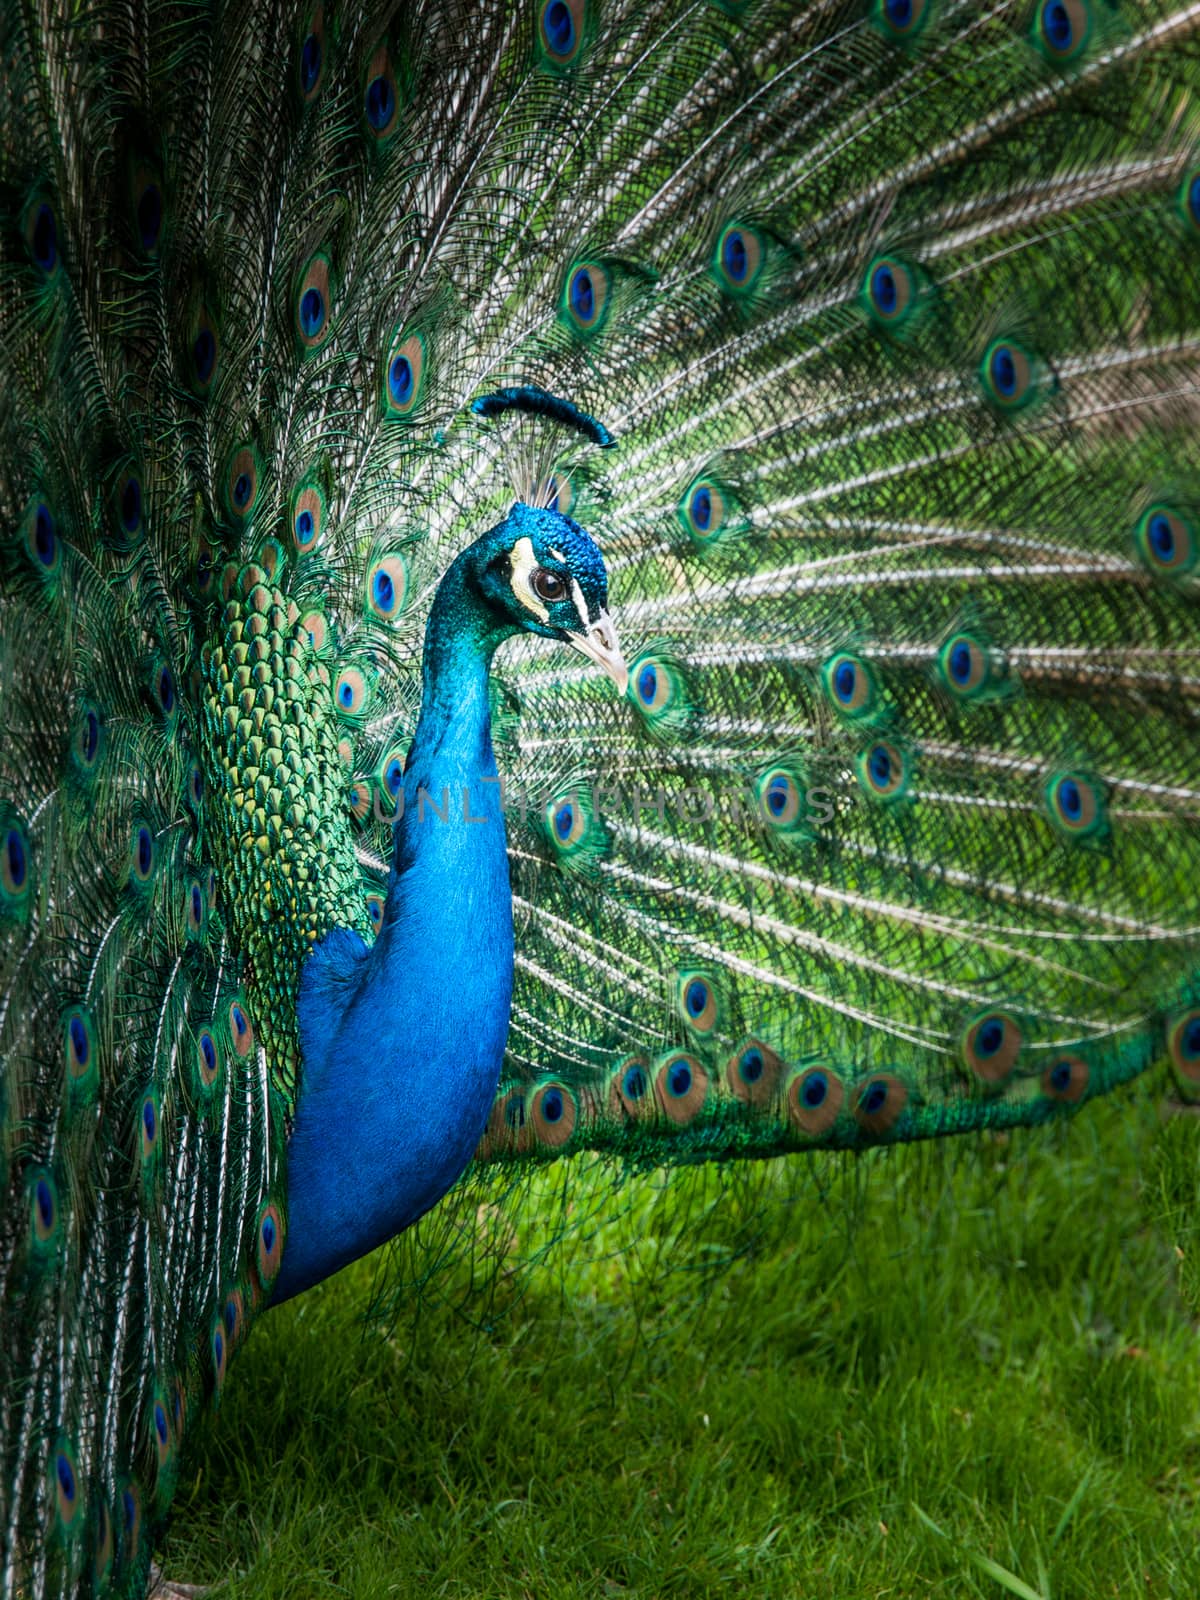 Close-up portrait of peacock with spread feathers. Low key image.